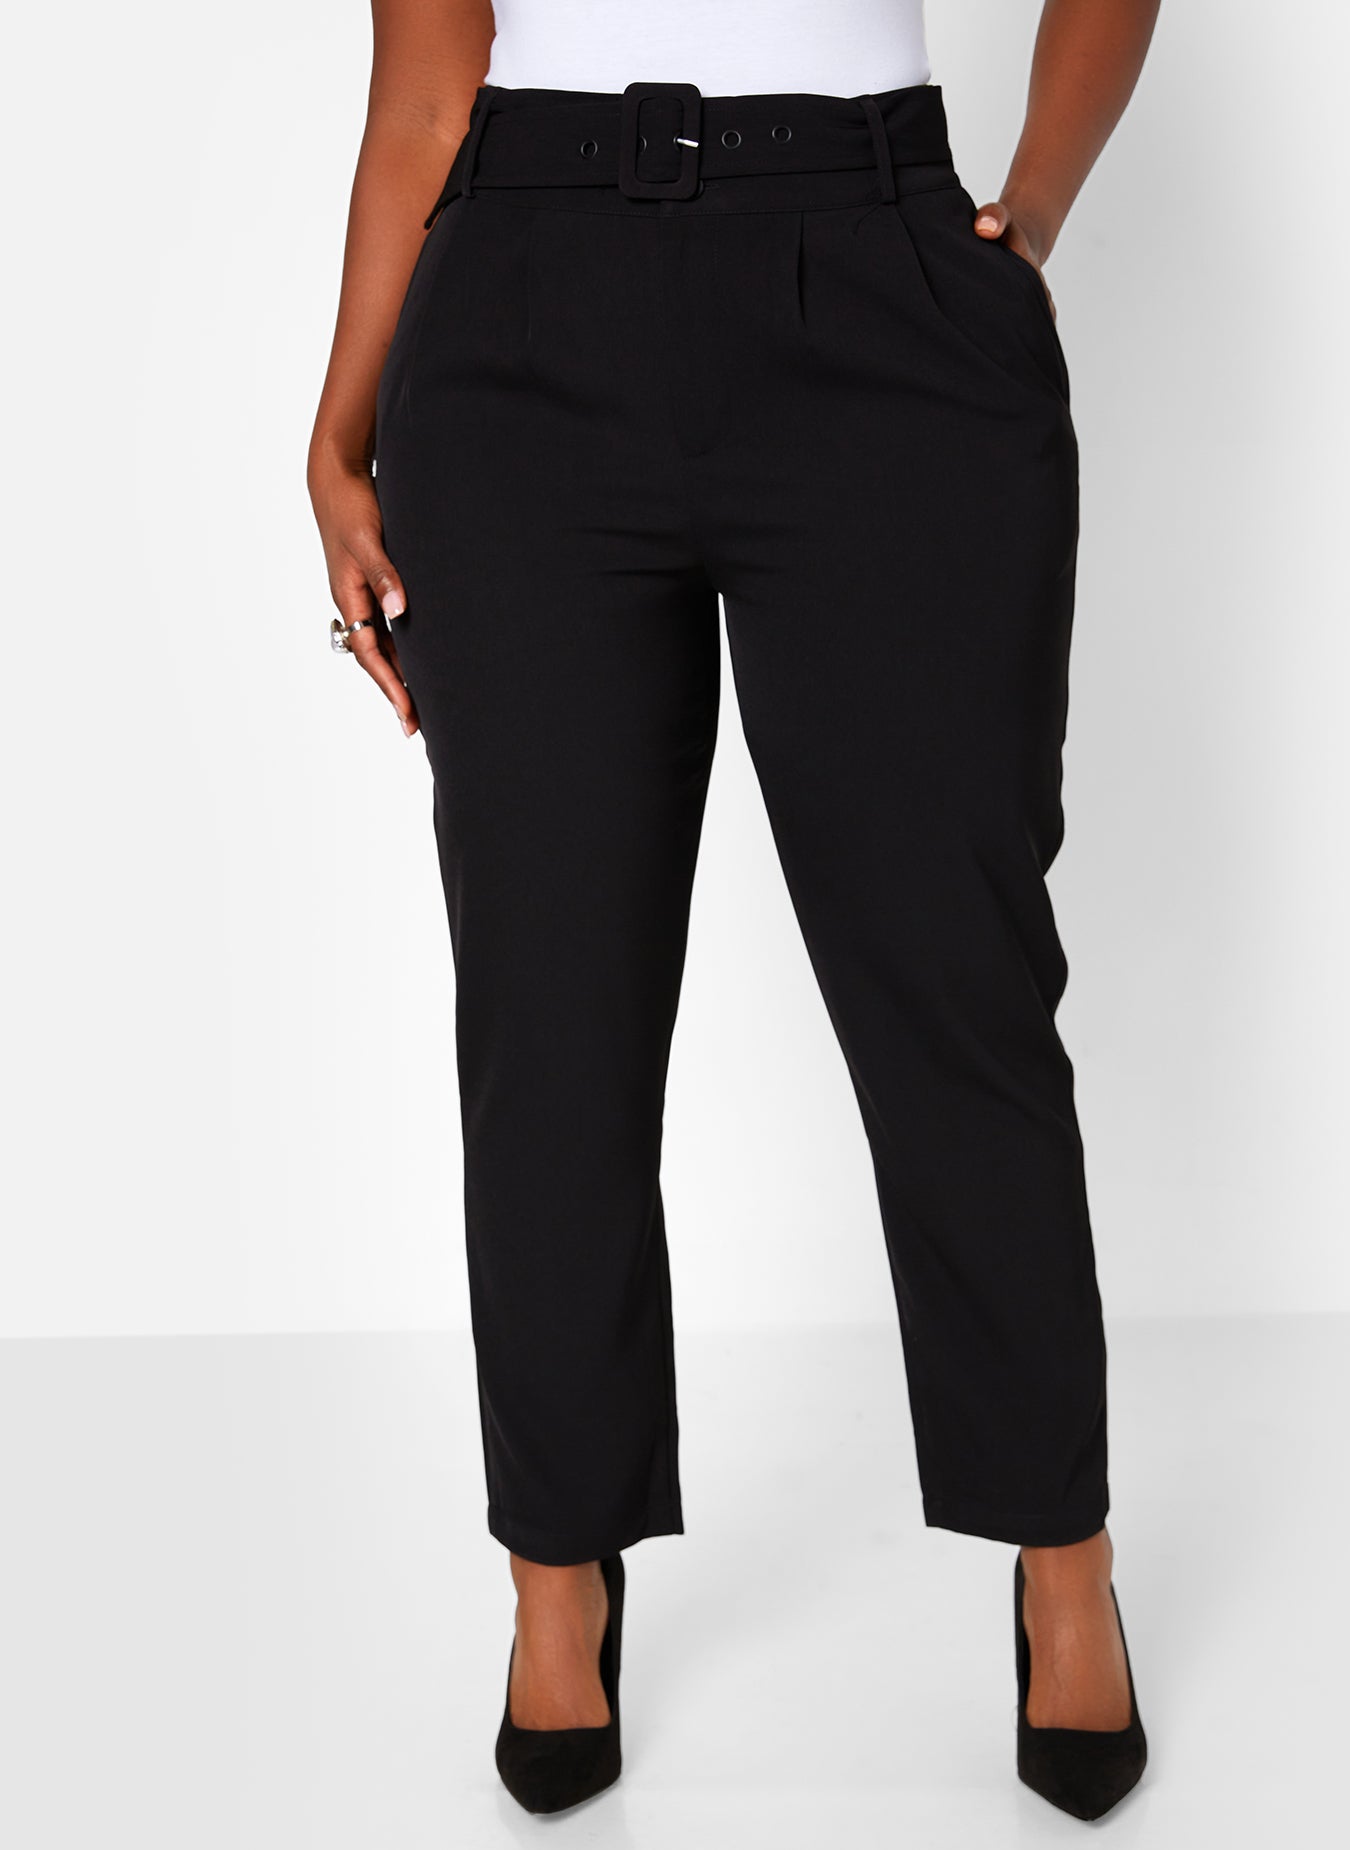 Black In A Meeting Wide Belt Ankle Pants W. Pockets Plus Sizes